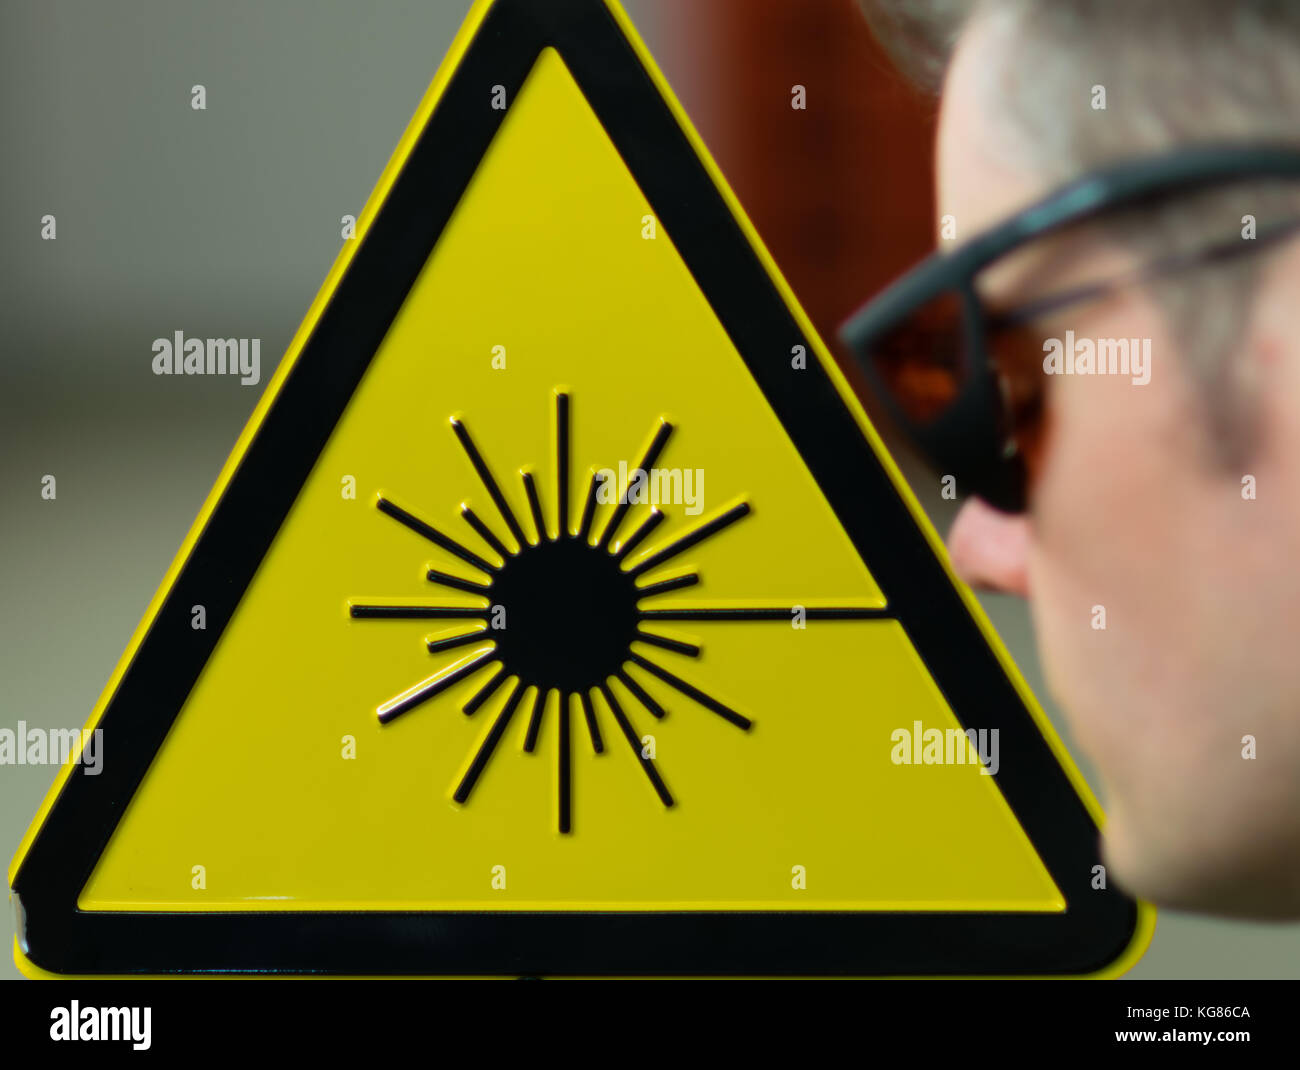 Laser safety sign and laser safety googles Stock Photo